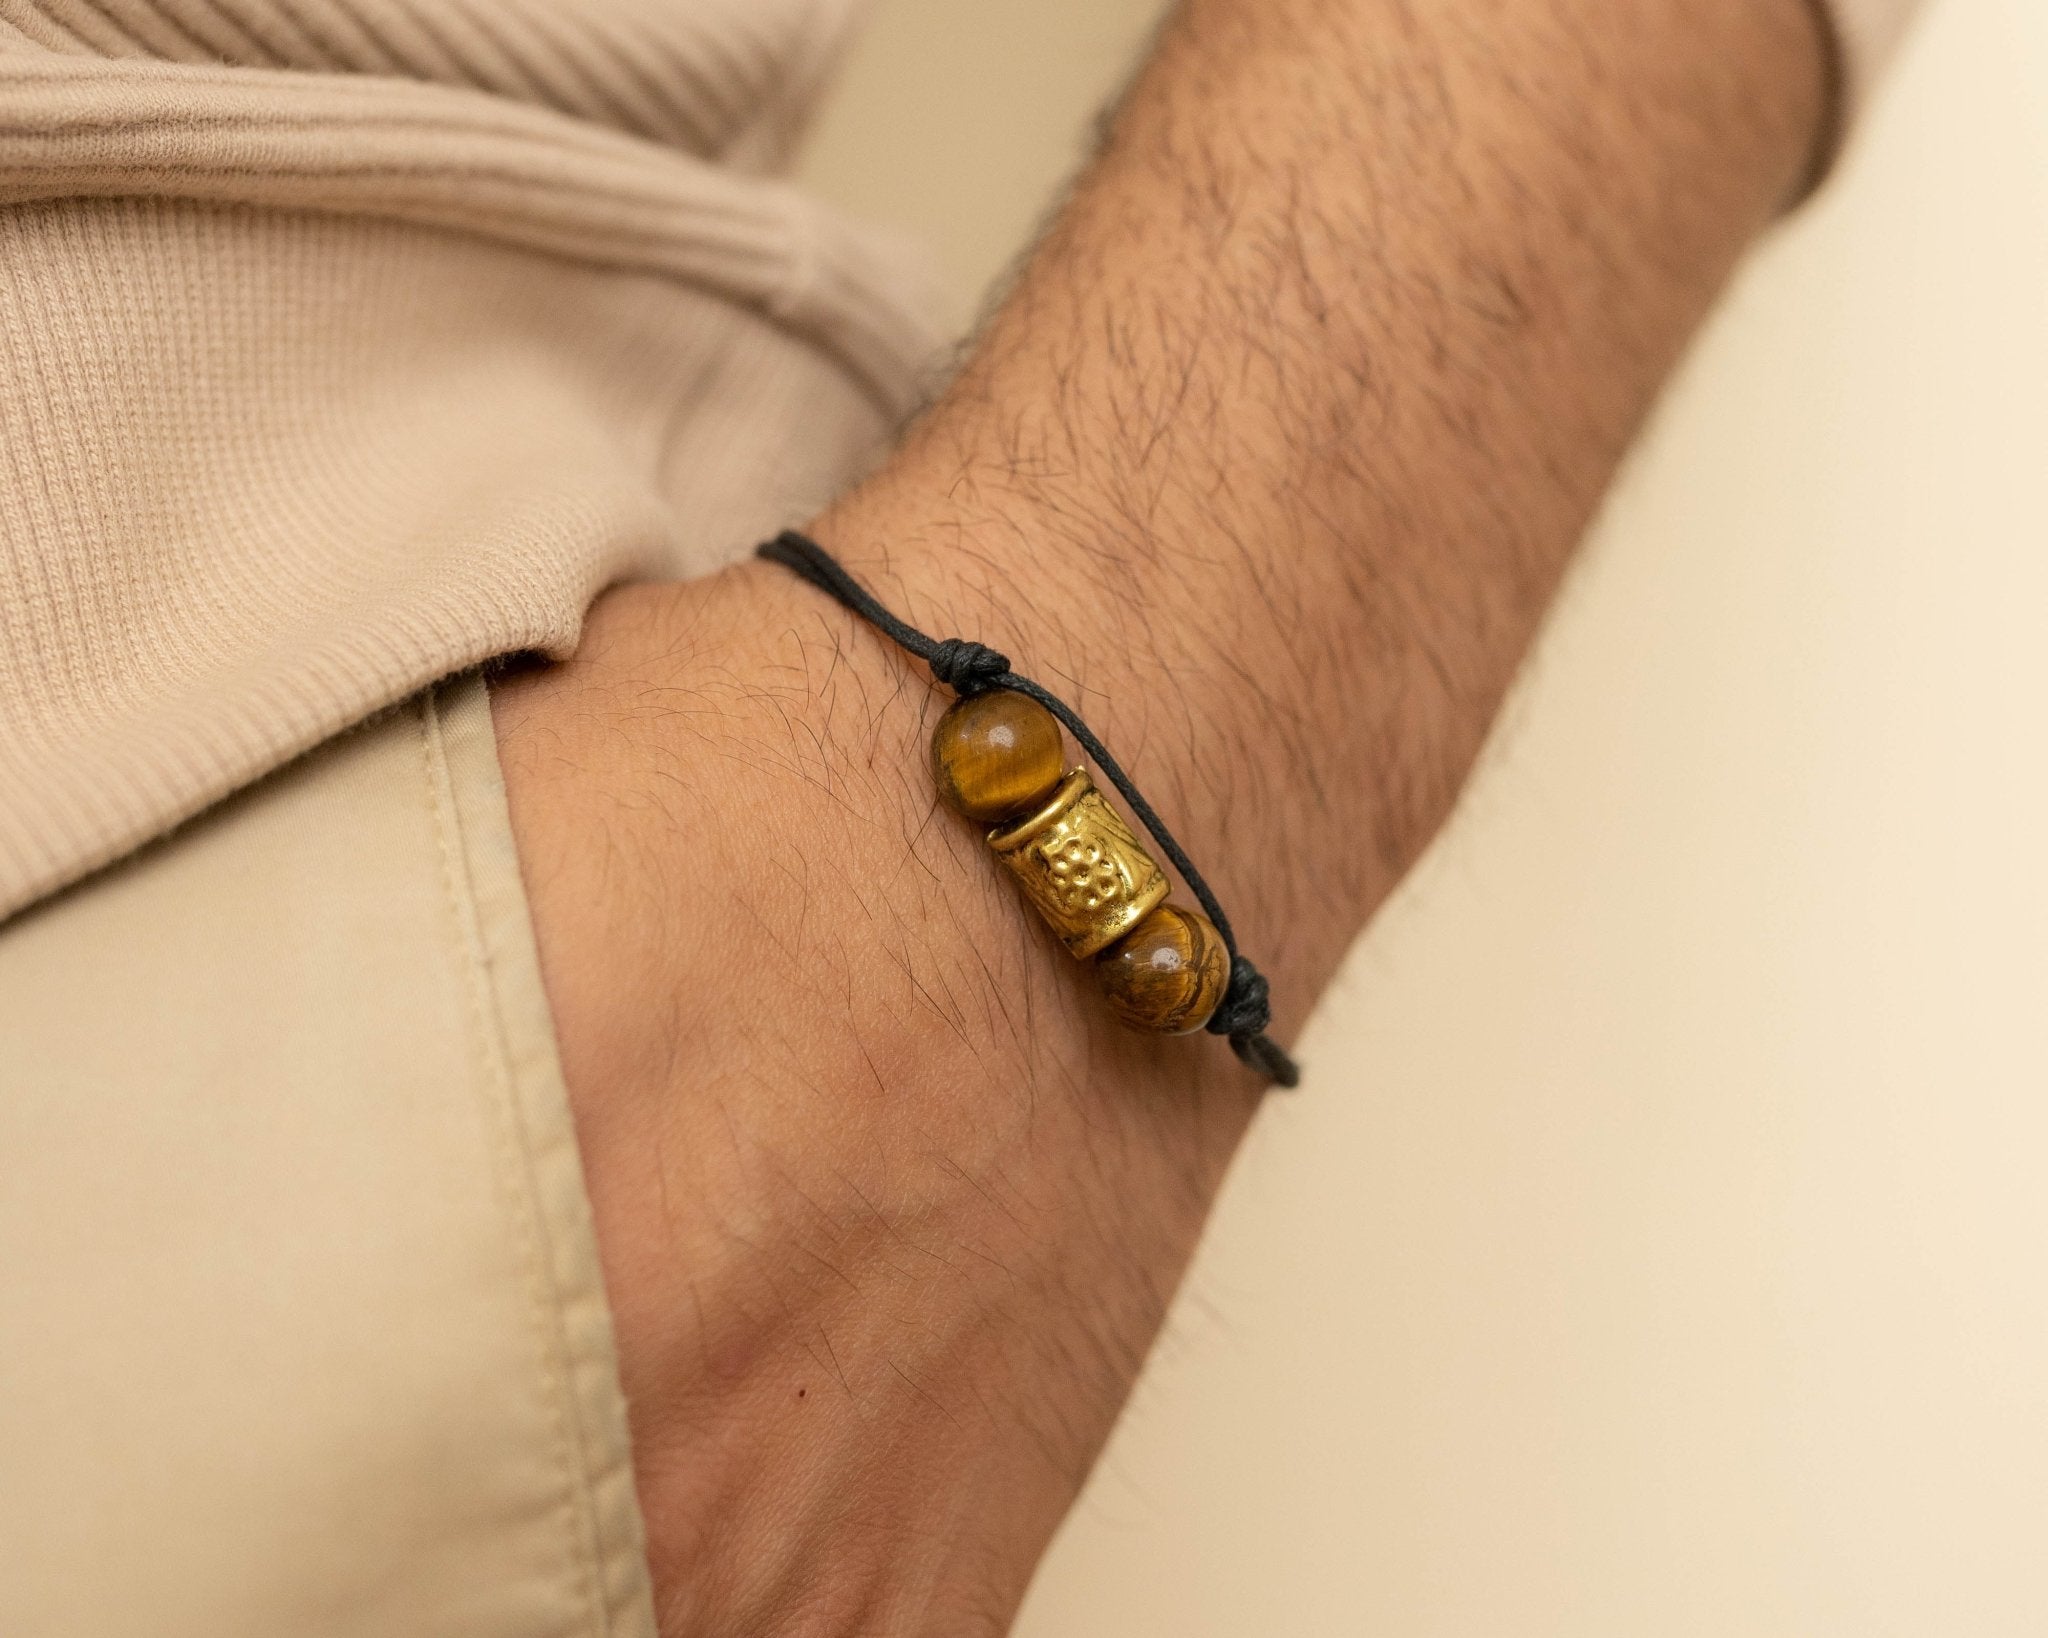 Tiger's Eye with Golden Charm Thread Bracelet - Bodh Gem and Crystals